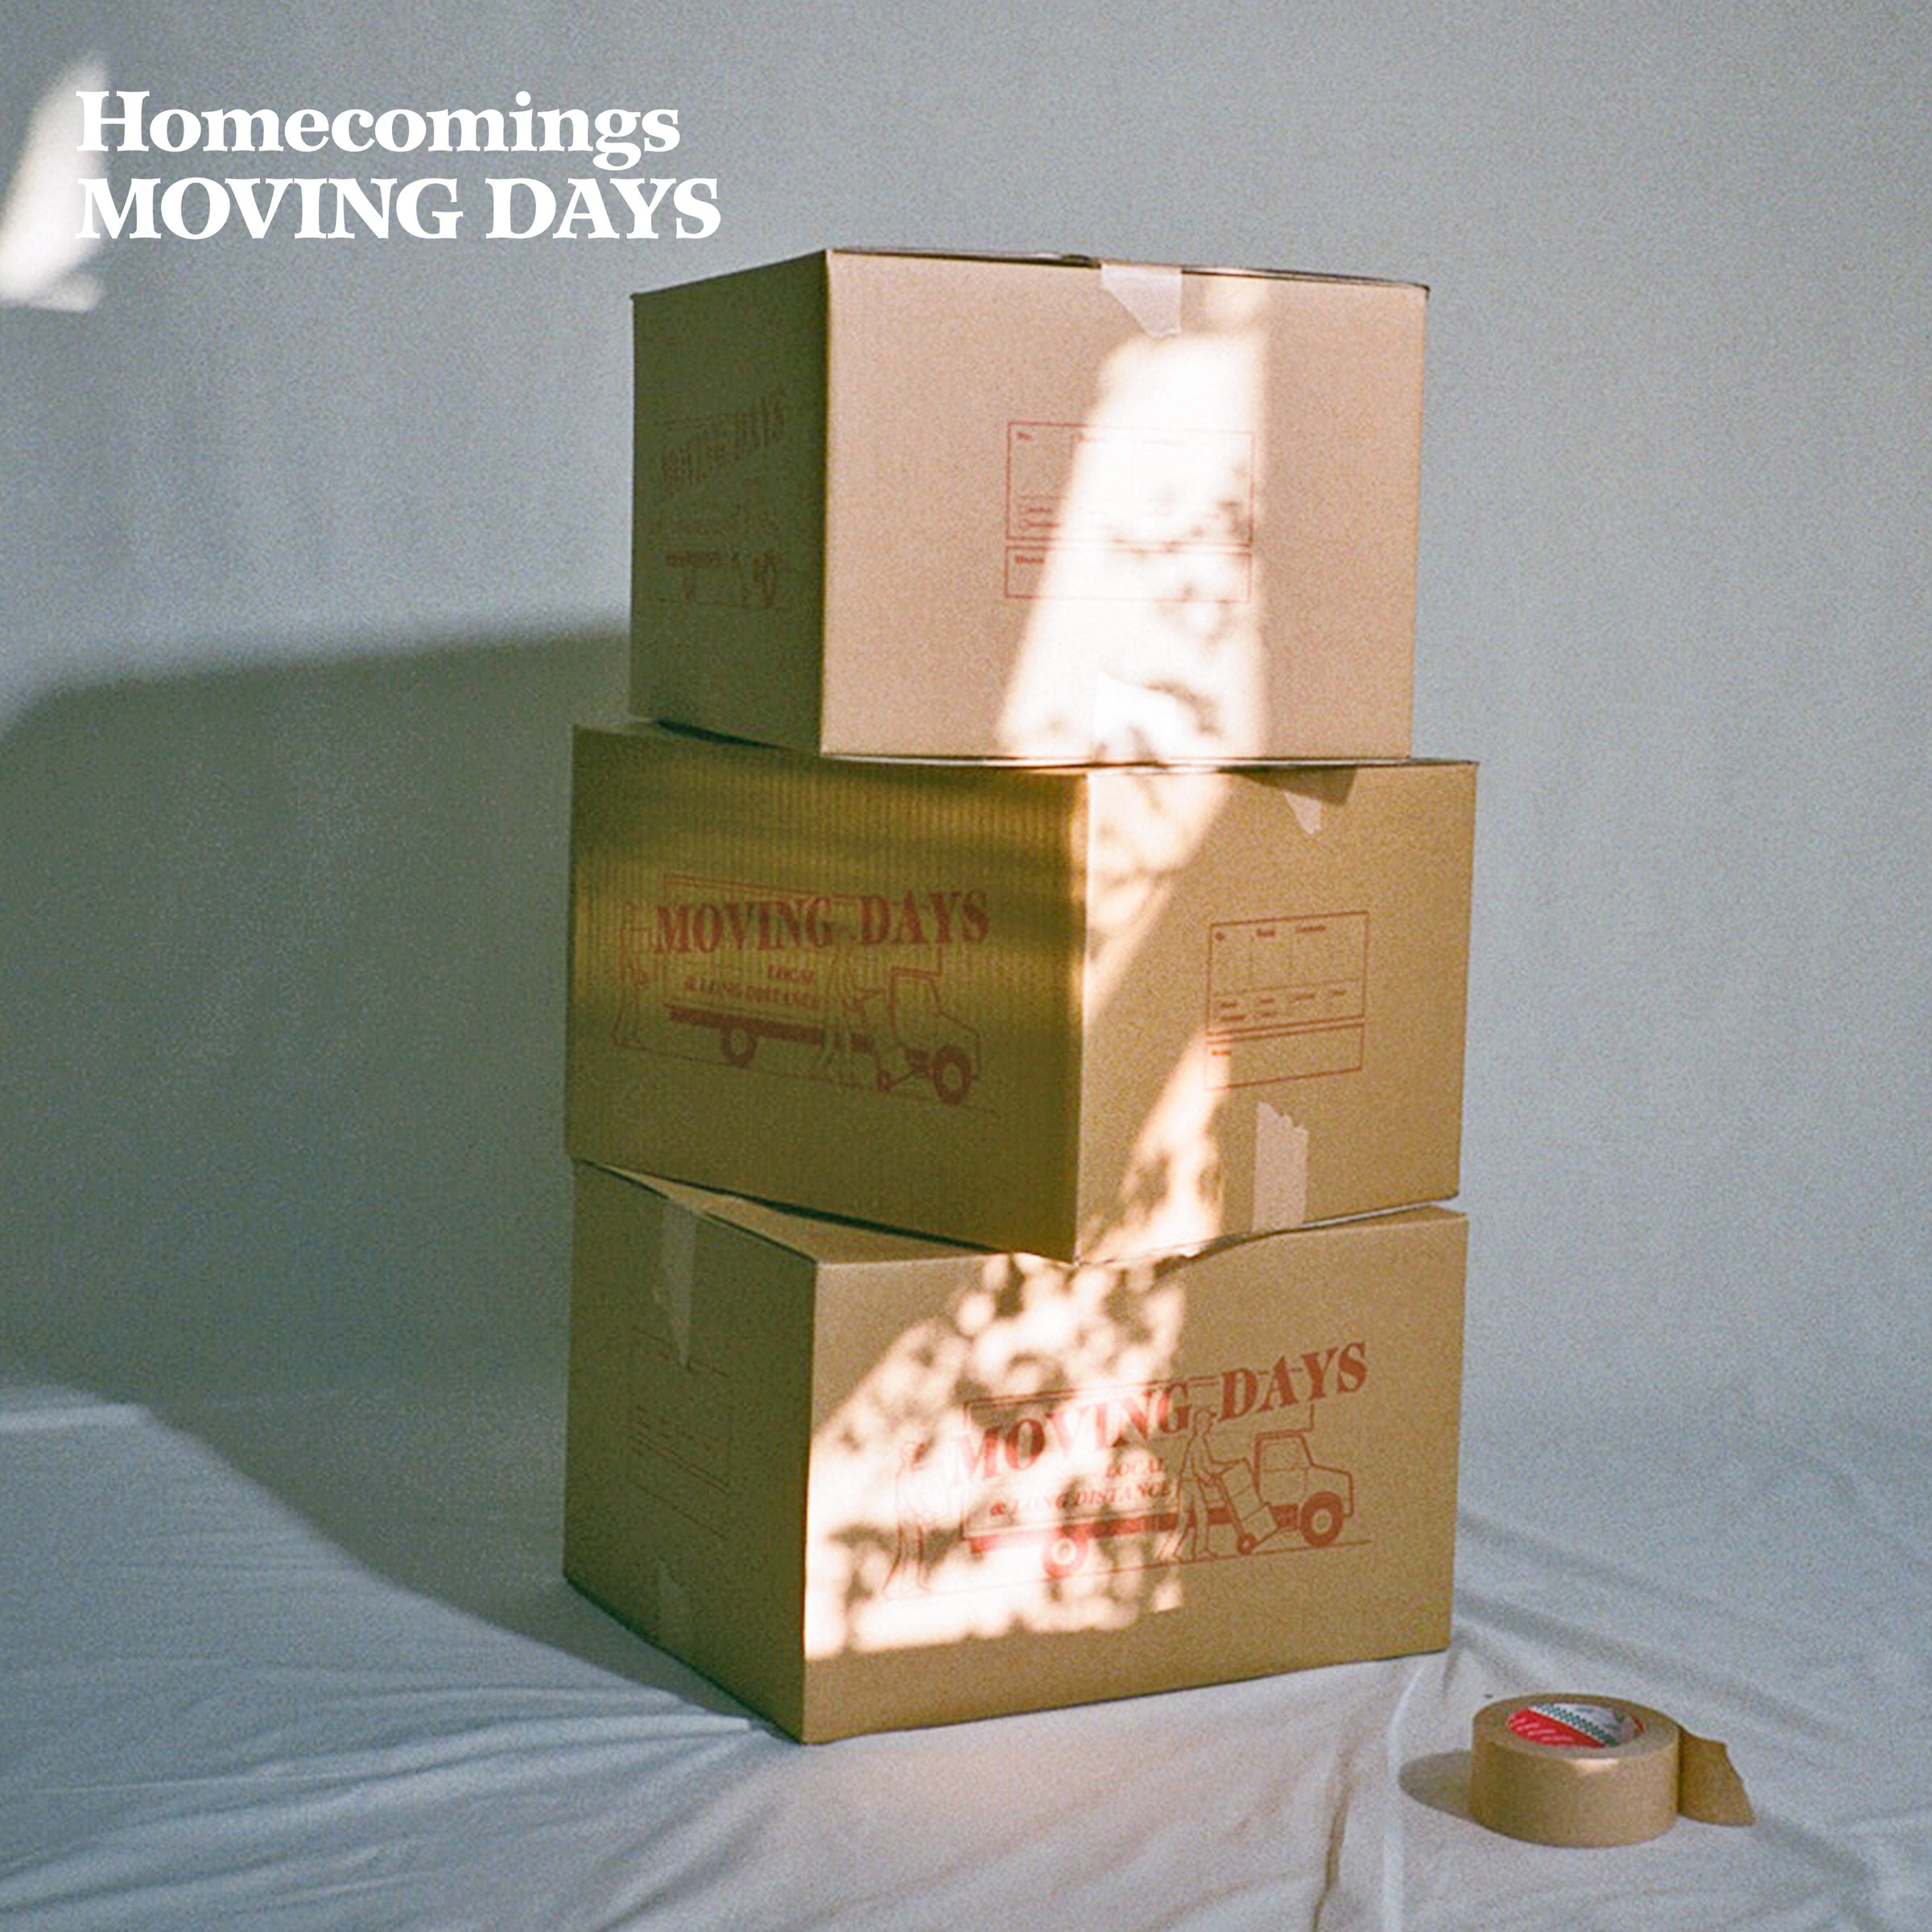 Homecomings - Moving Days (2021-05-12) [FLAC 24bit/96kHz]